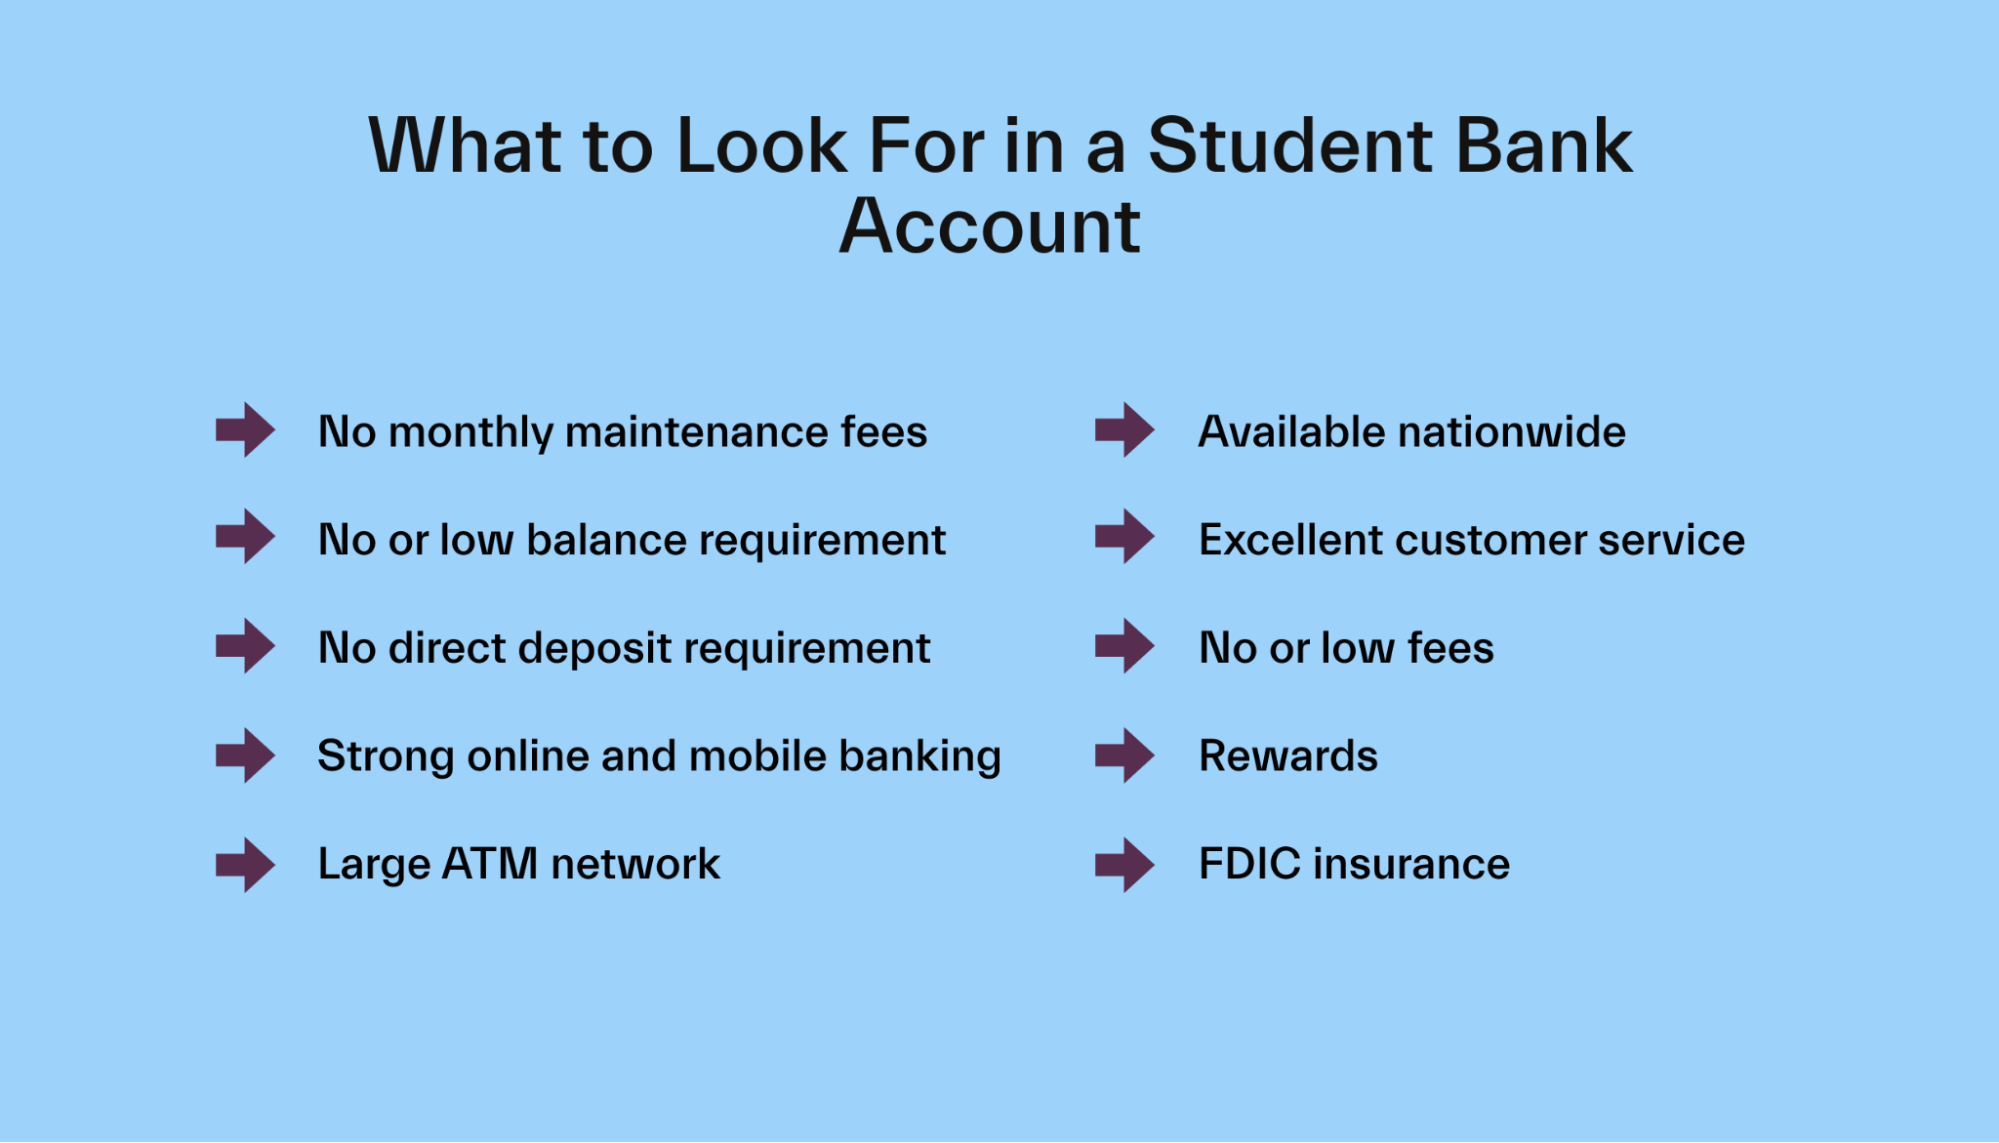 How to Choose a Student Bank Account